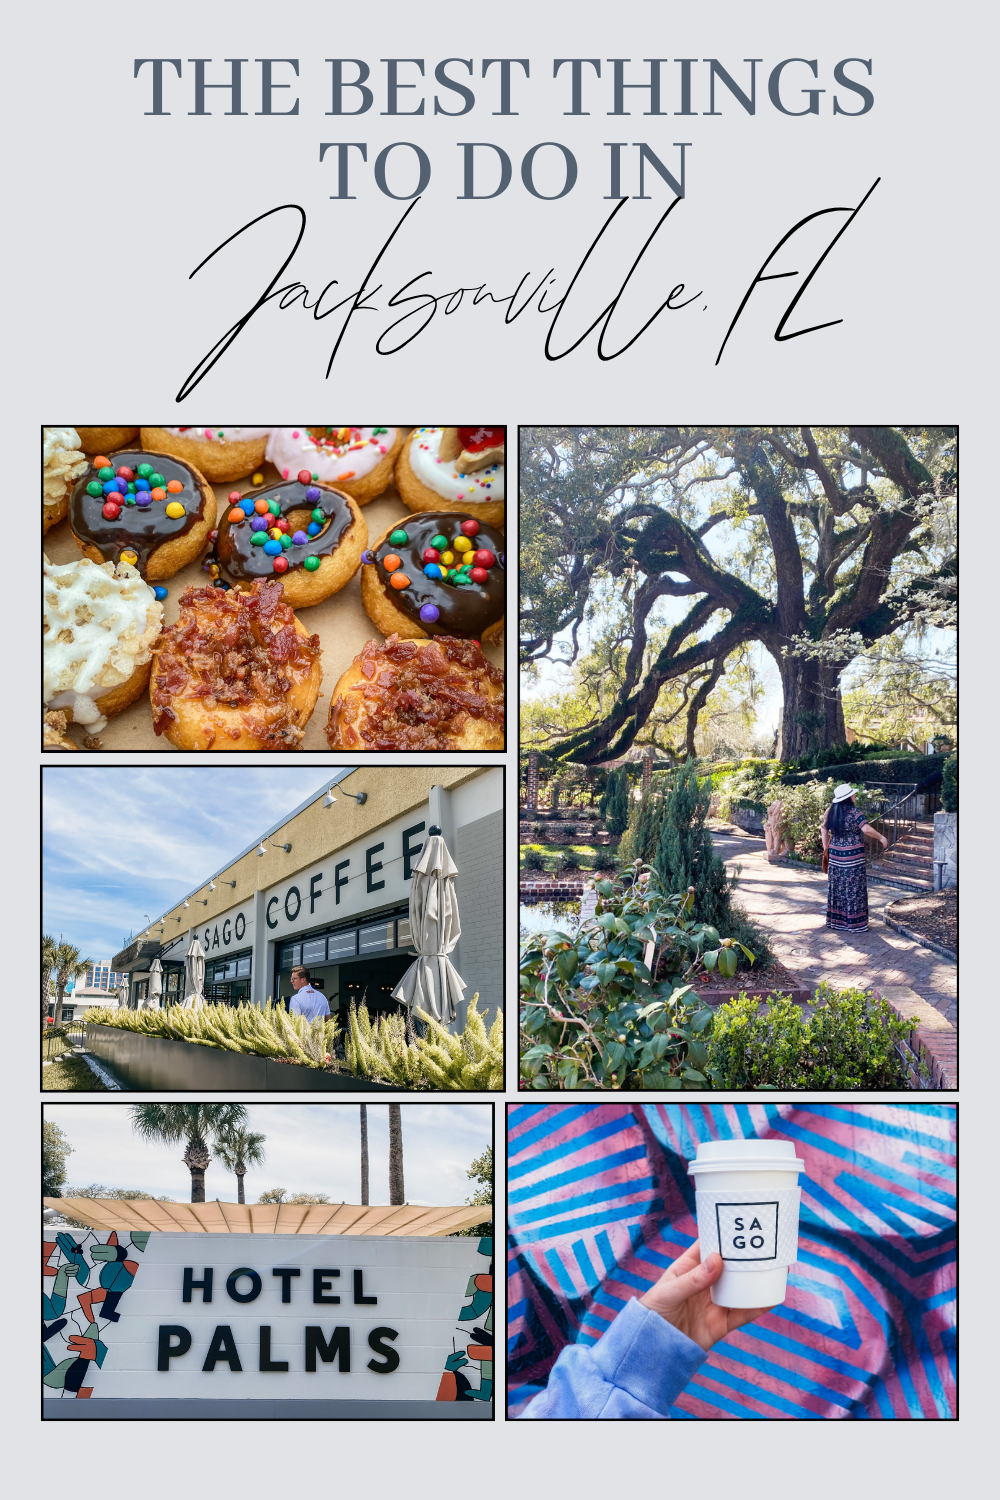 The Best Things to do in Jacksonville, FL